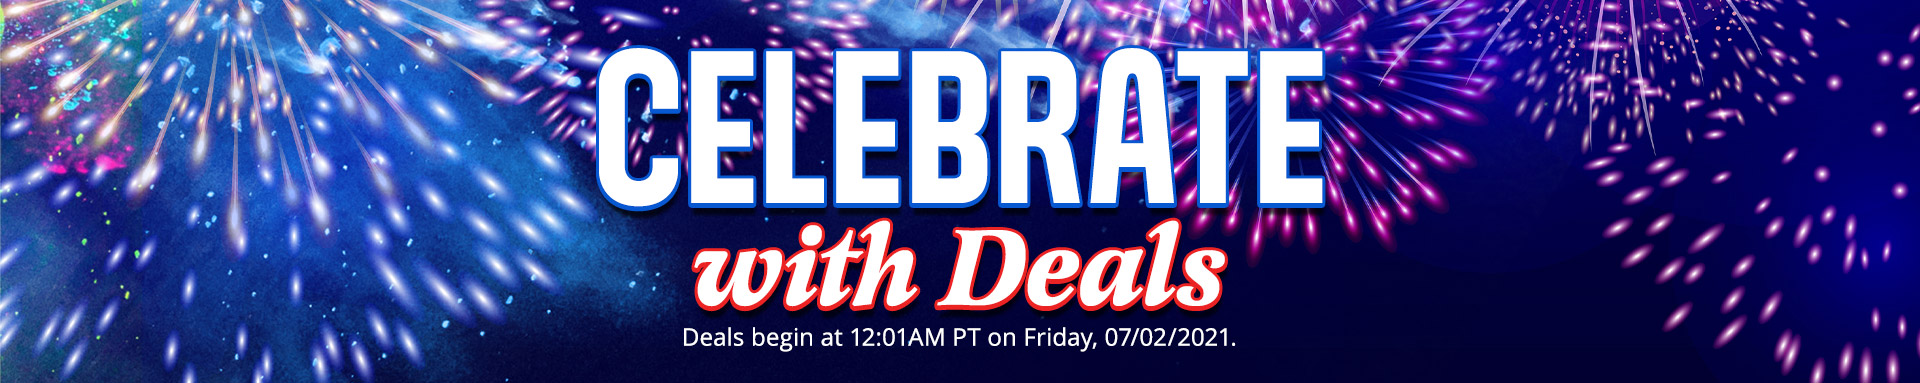 CELEBRATE WITH DEALS